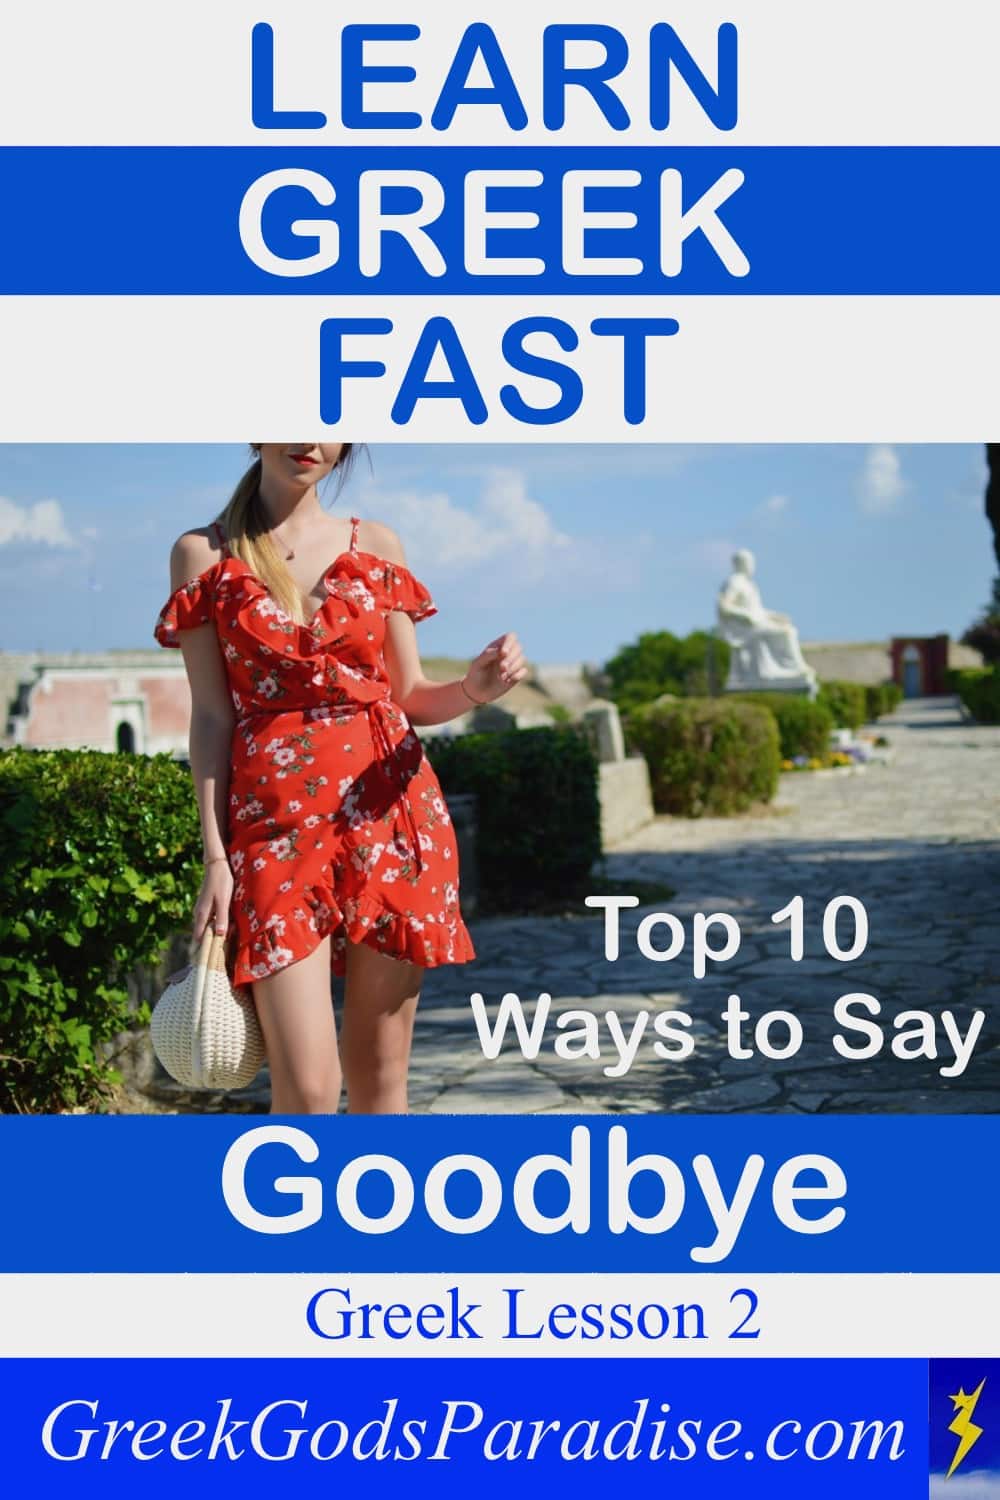 Ways to Say Goodbye in Greek Lesson